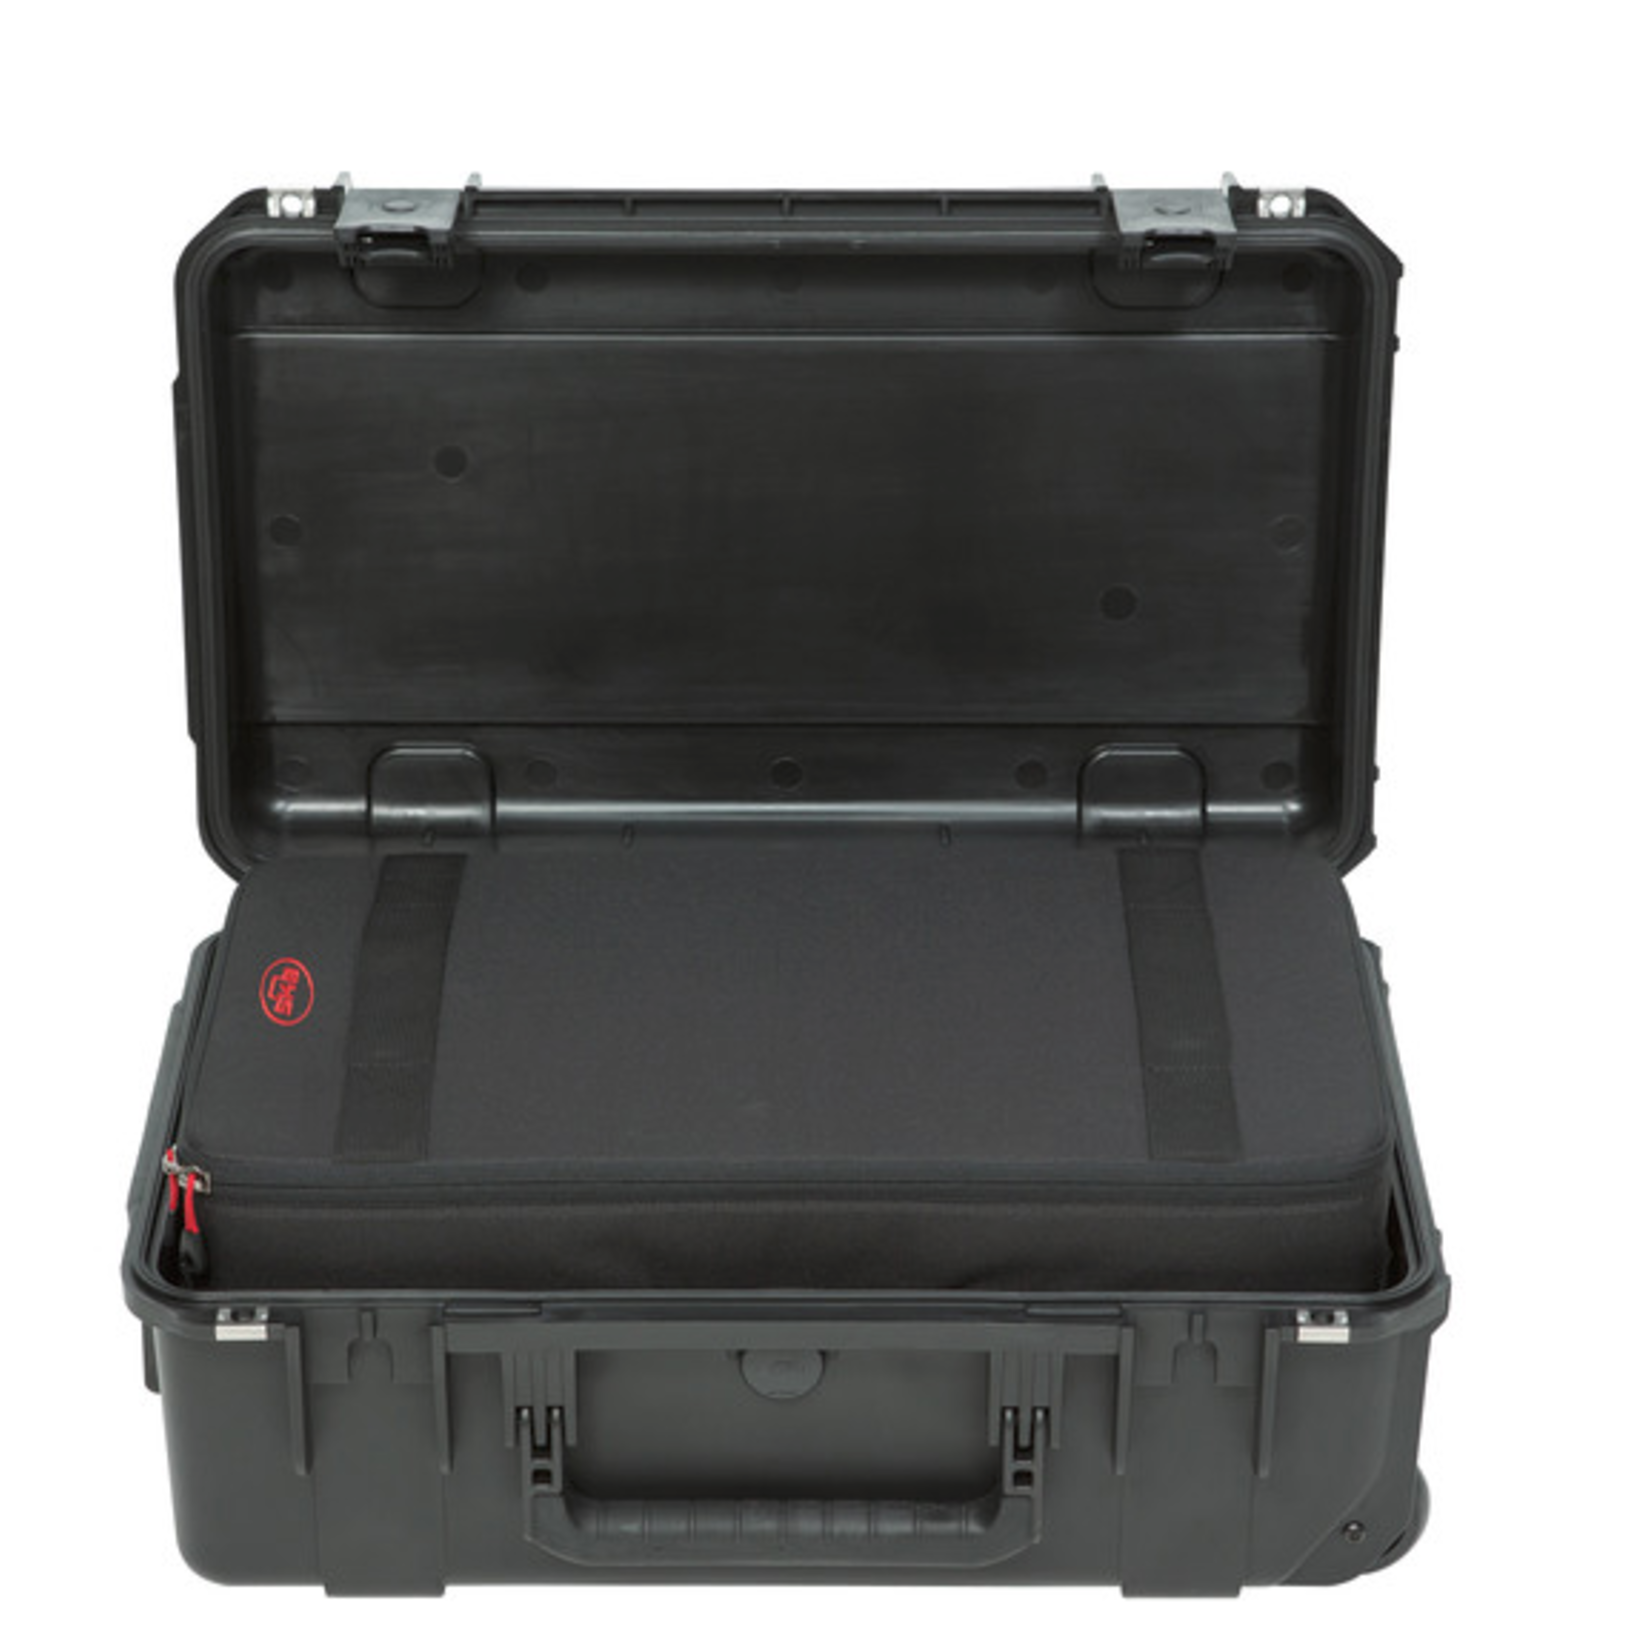 SKB Cases SKB iSeries 2011-7 Case with Think Tank Removable Zippered Divider Interior (Black)